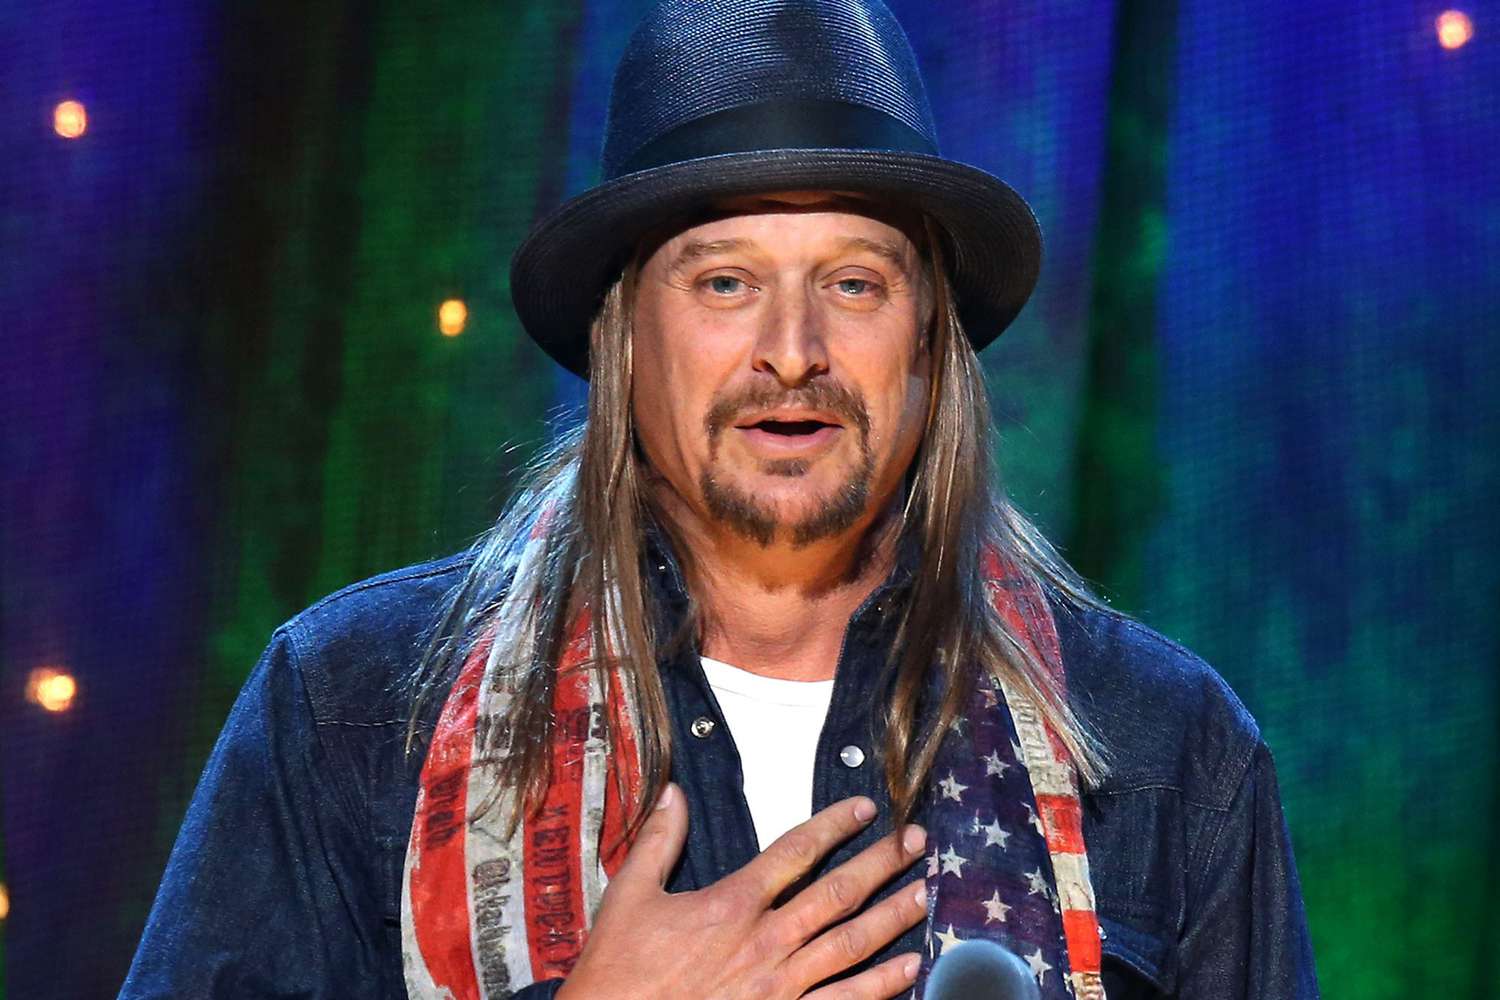 Where Does Kid Rock Live? An Inside Look of His Homes